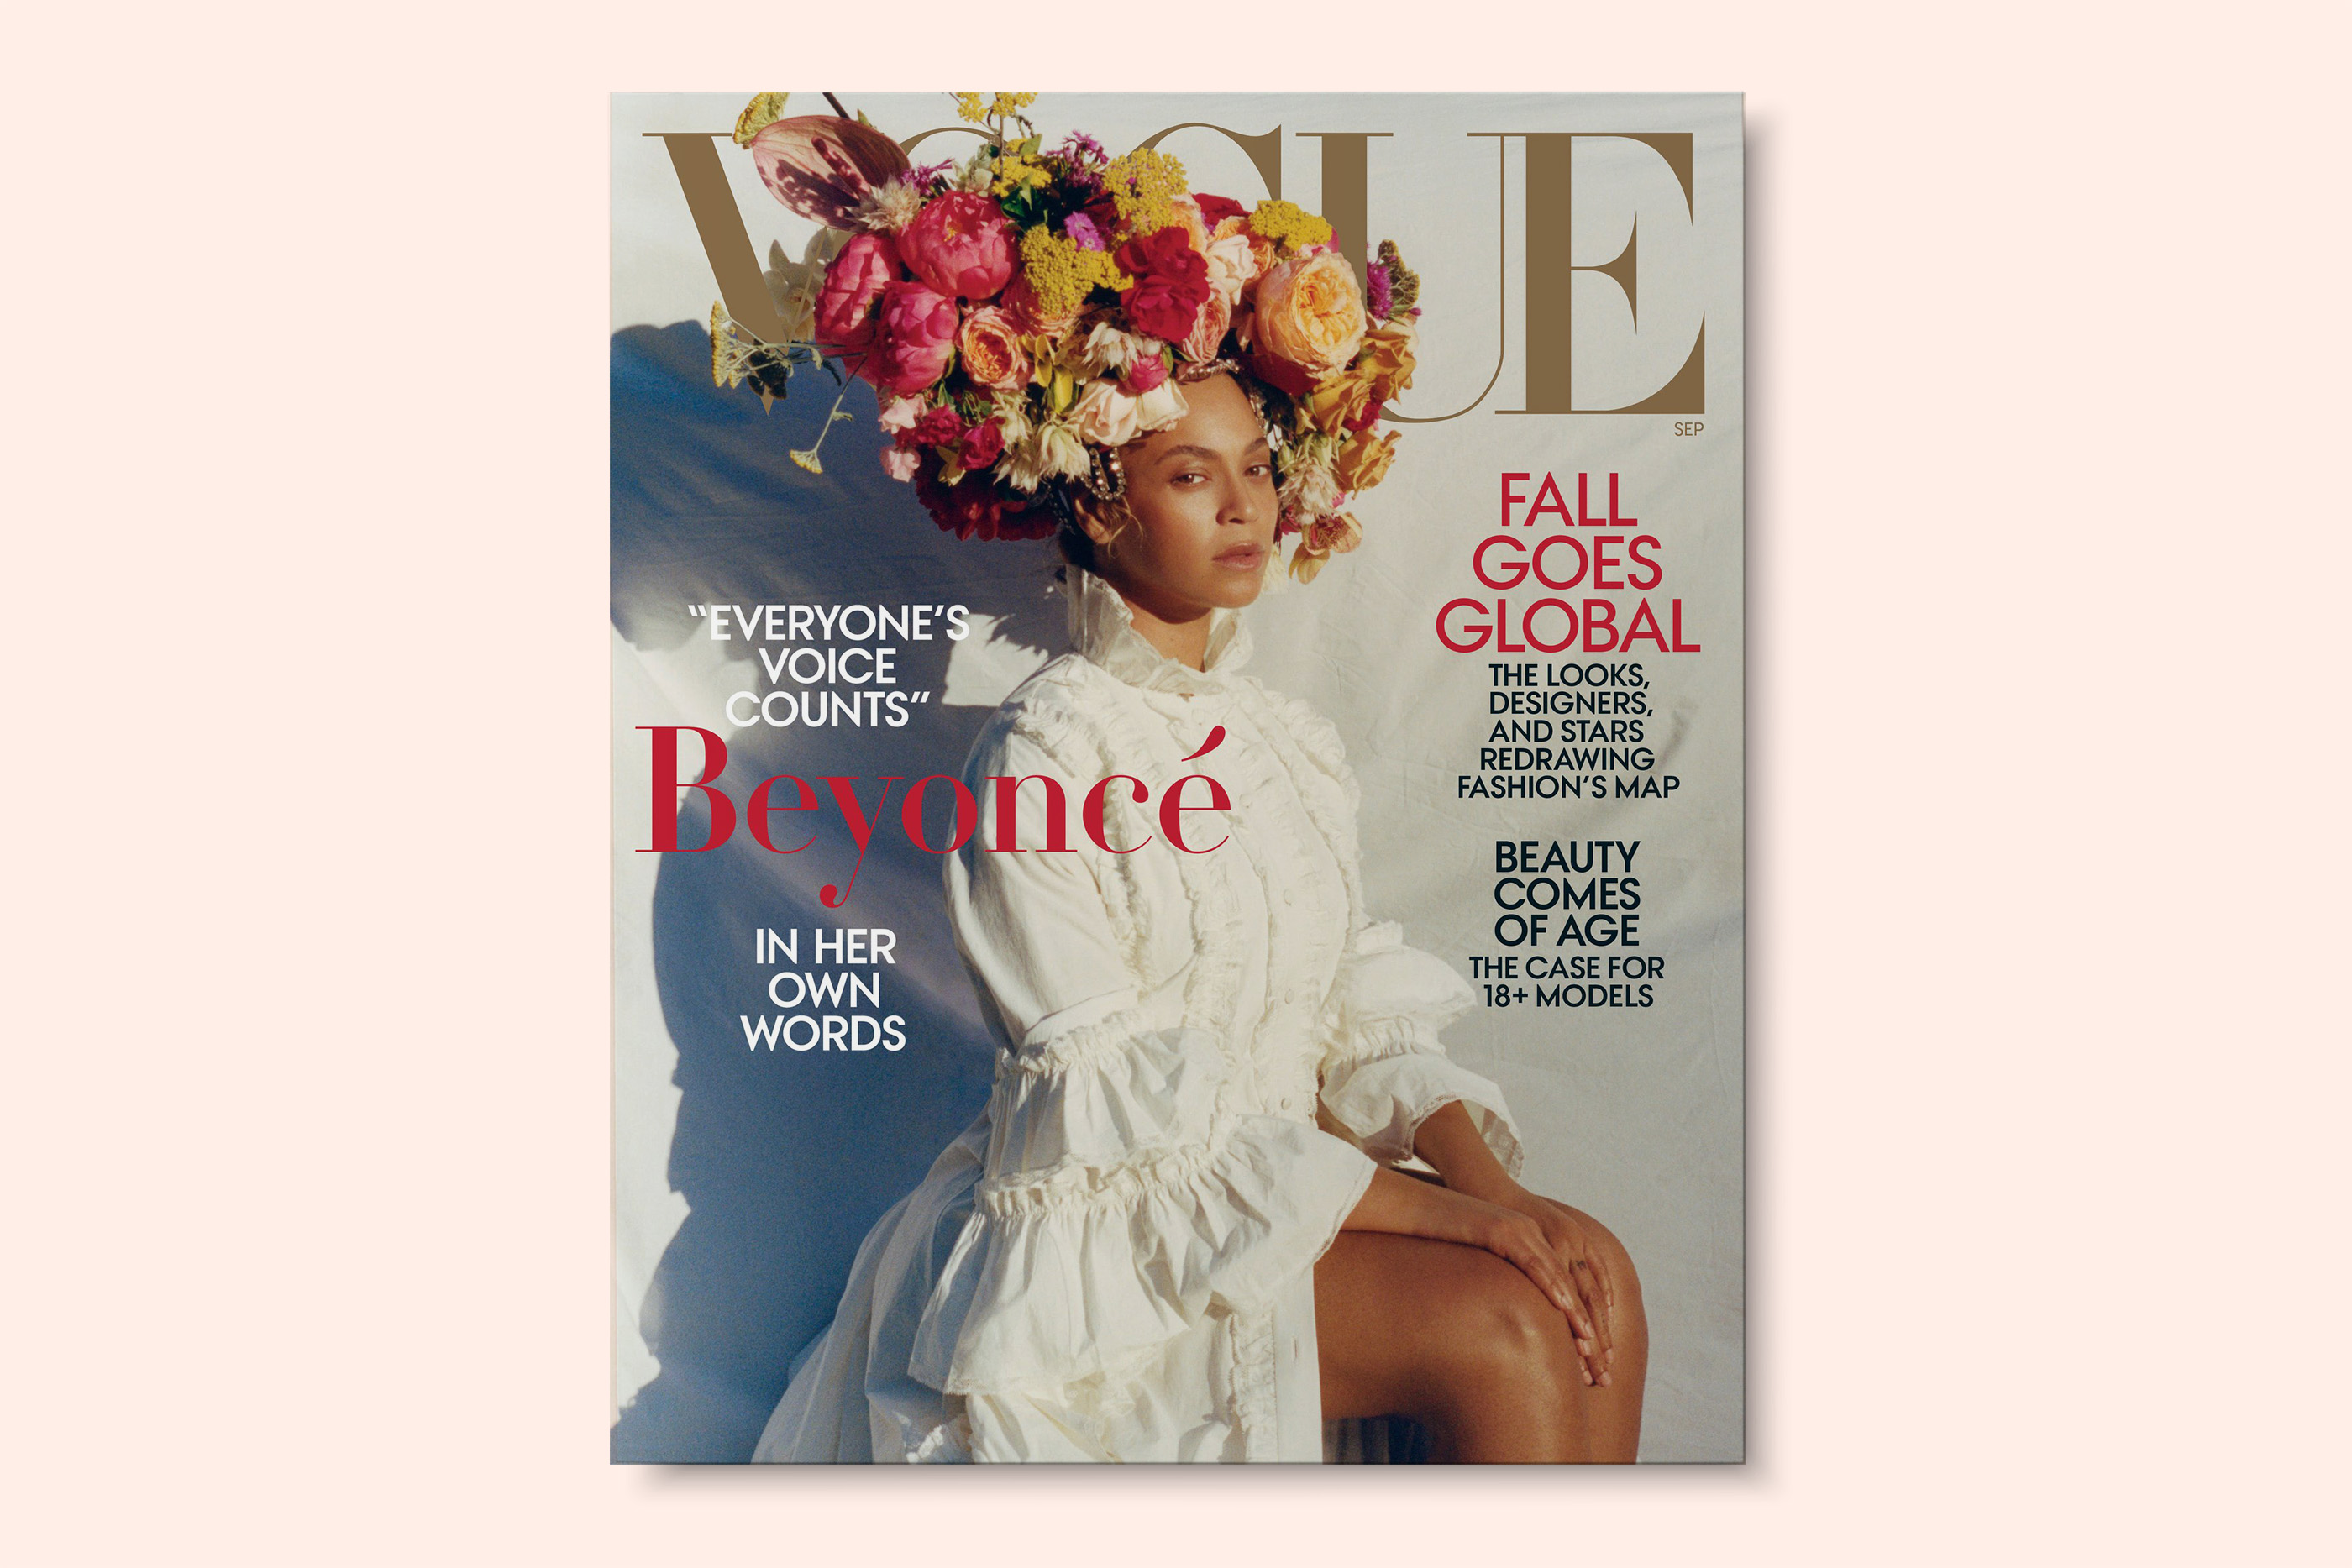 Meet the First Black Photographer to Shoot a 'Vogue' Cover, a 23-Year-Old Hand-Picked by Beyoncé